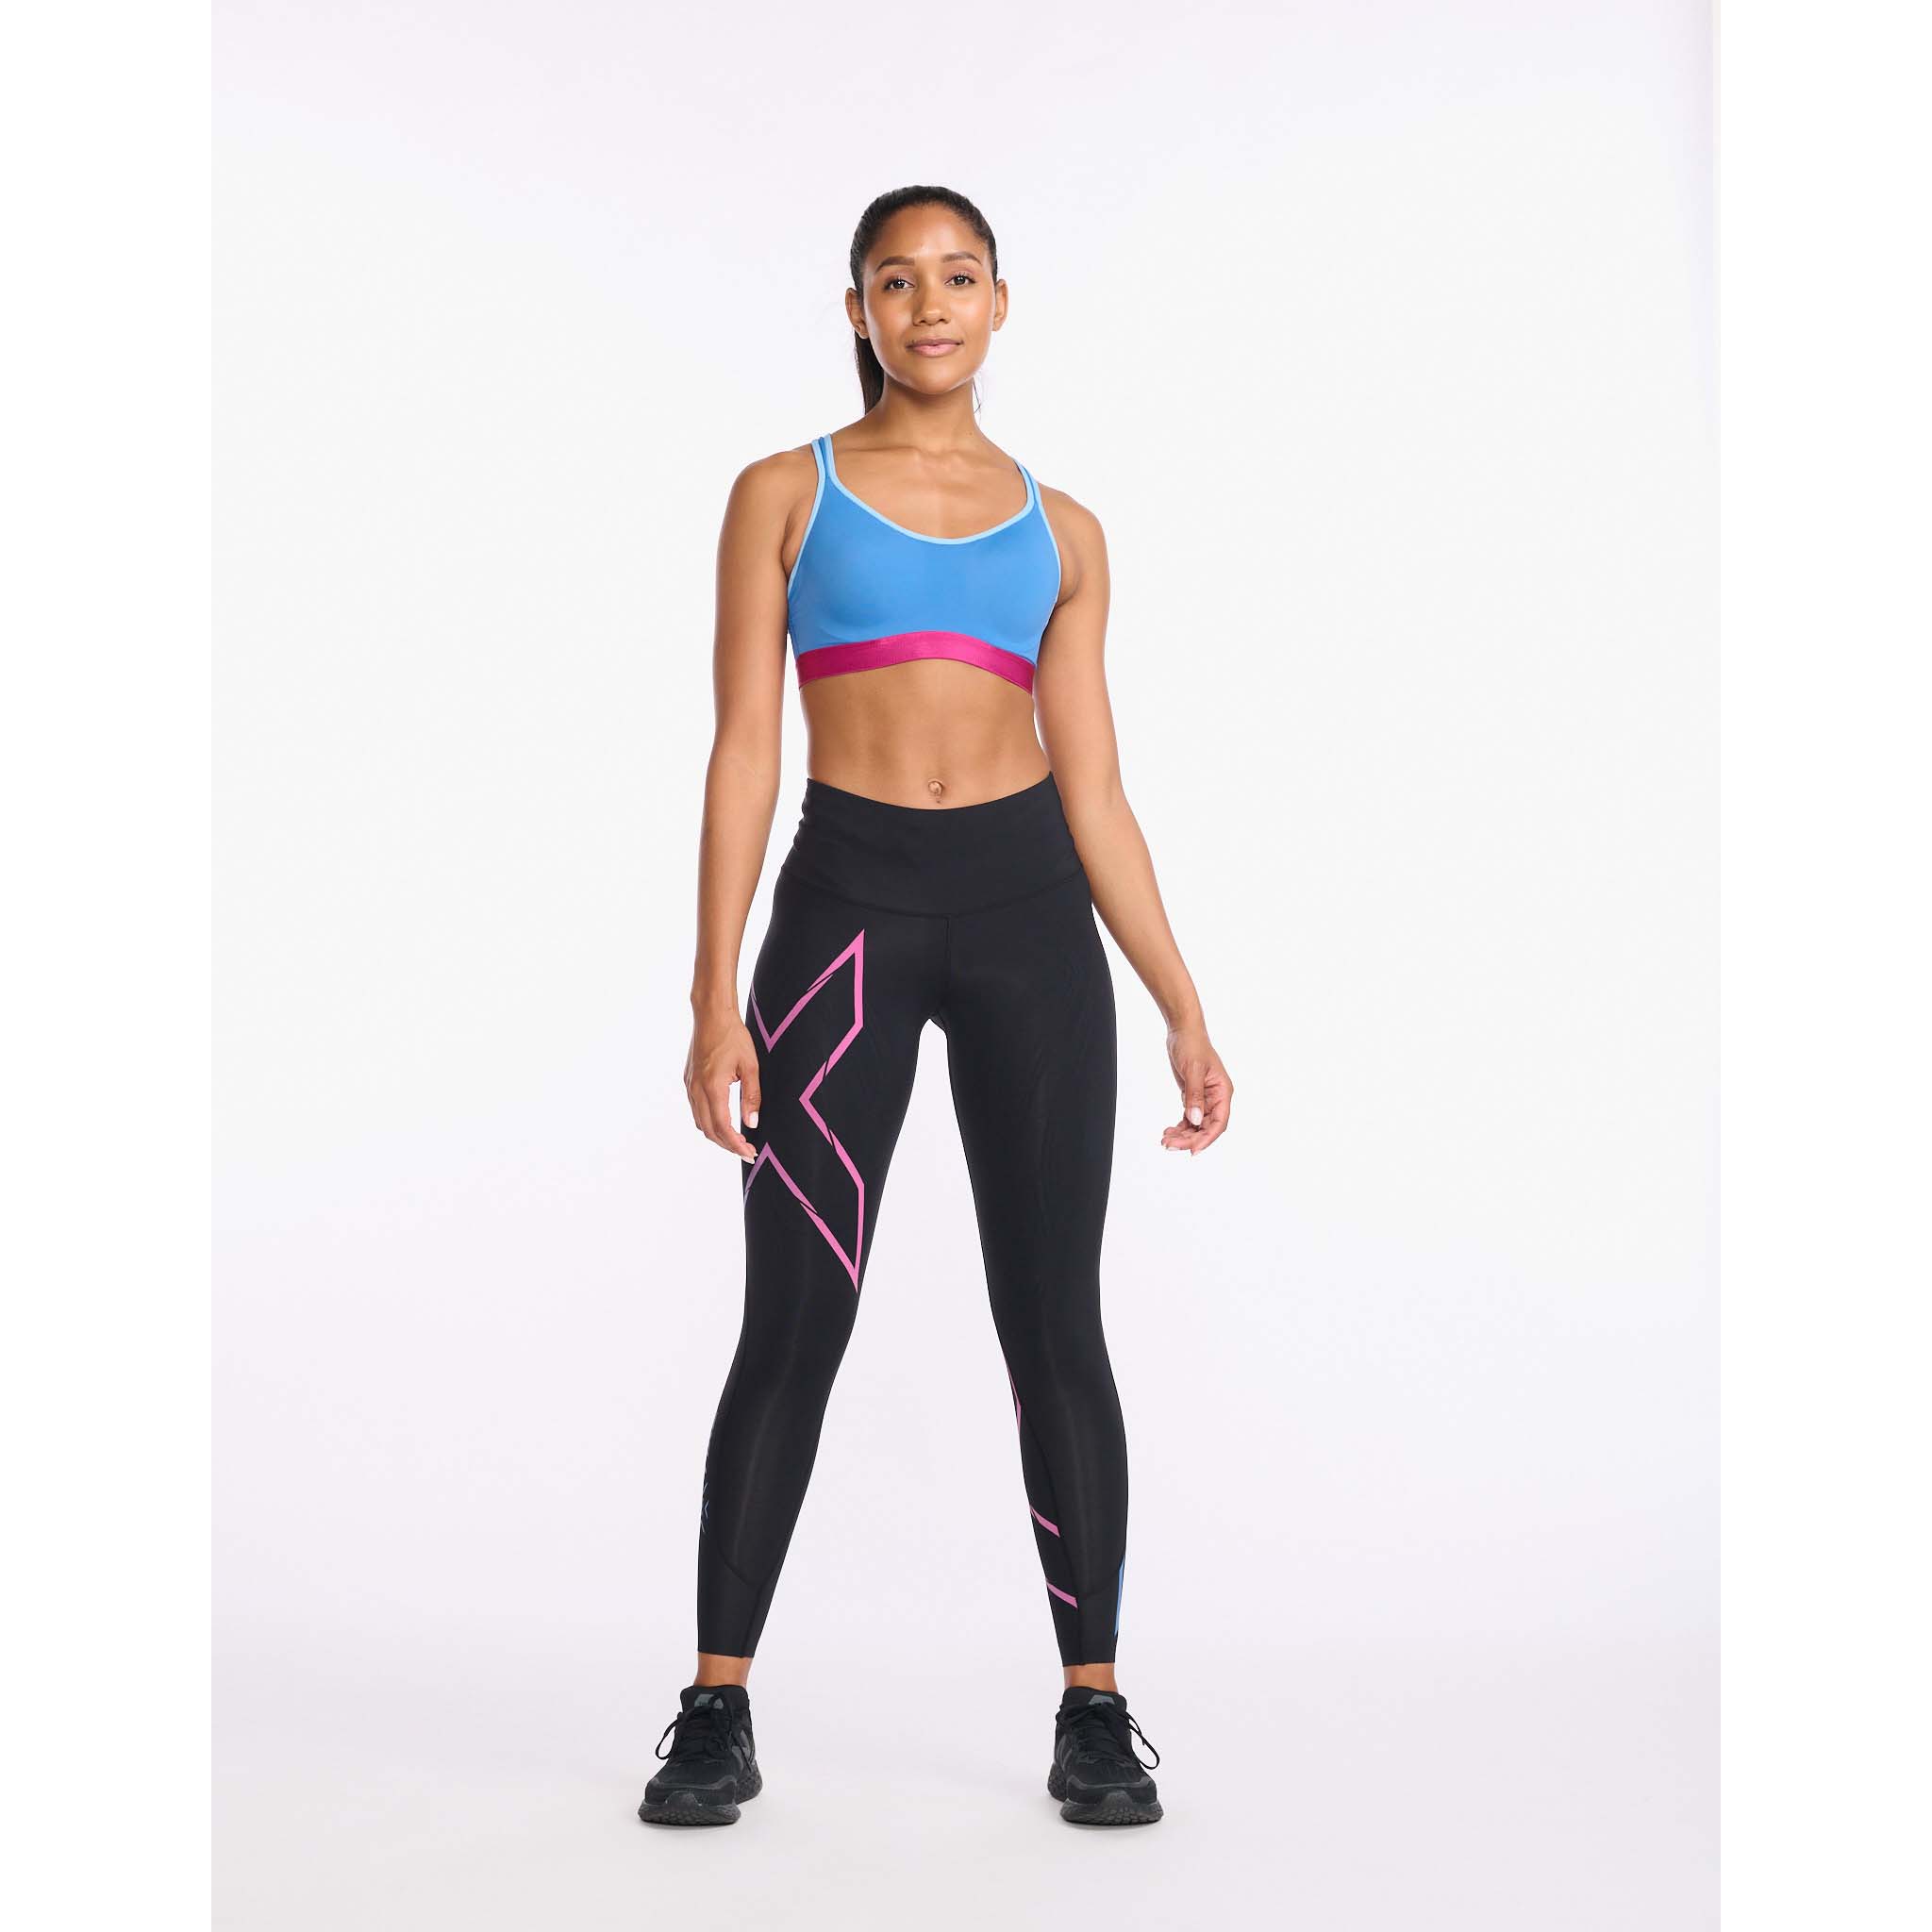 2XU Mid Rise Compression Women's Running Tights